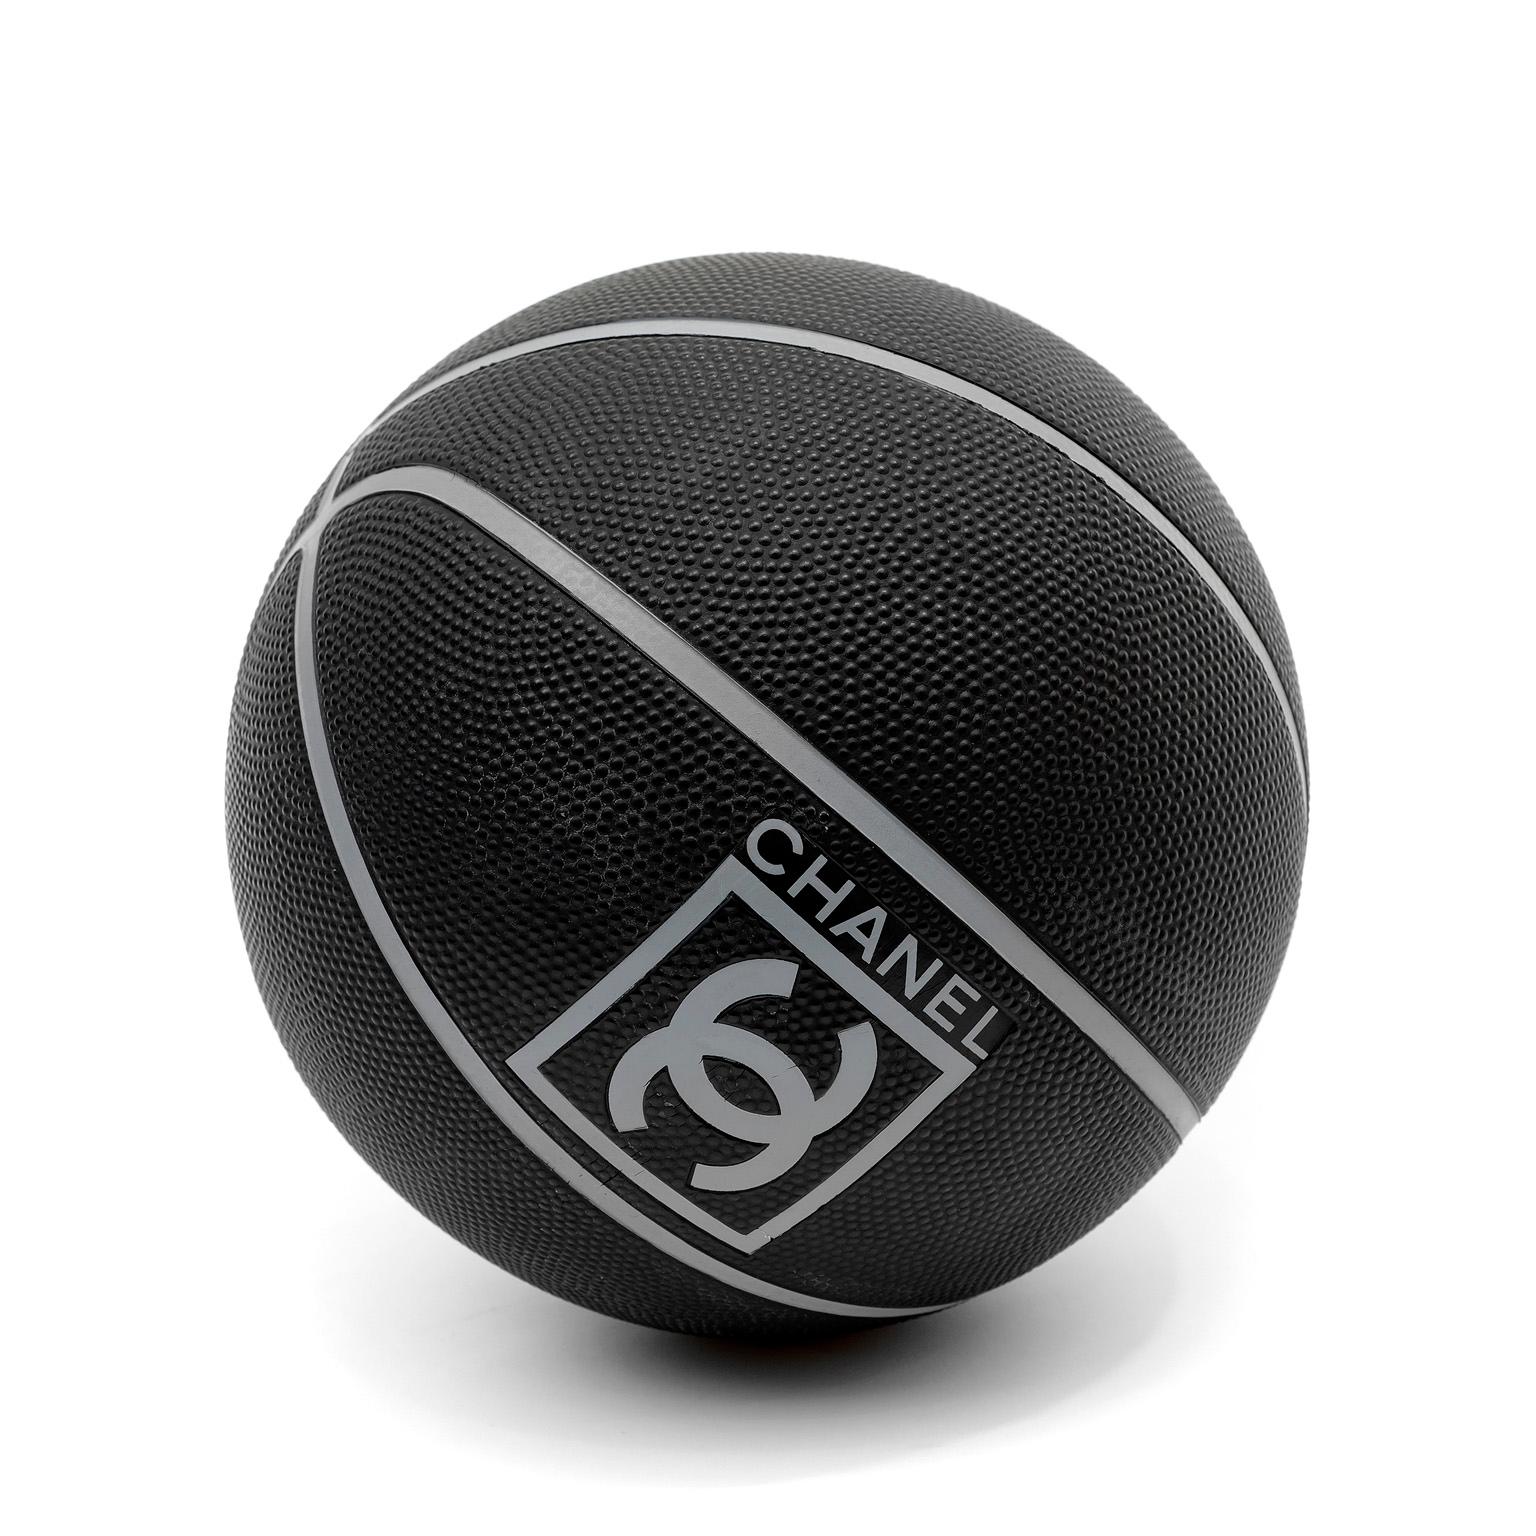 Authentic Chanel Black Game Series Basketball.  Collectible and rare.

PBF 13299